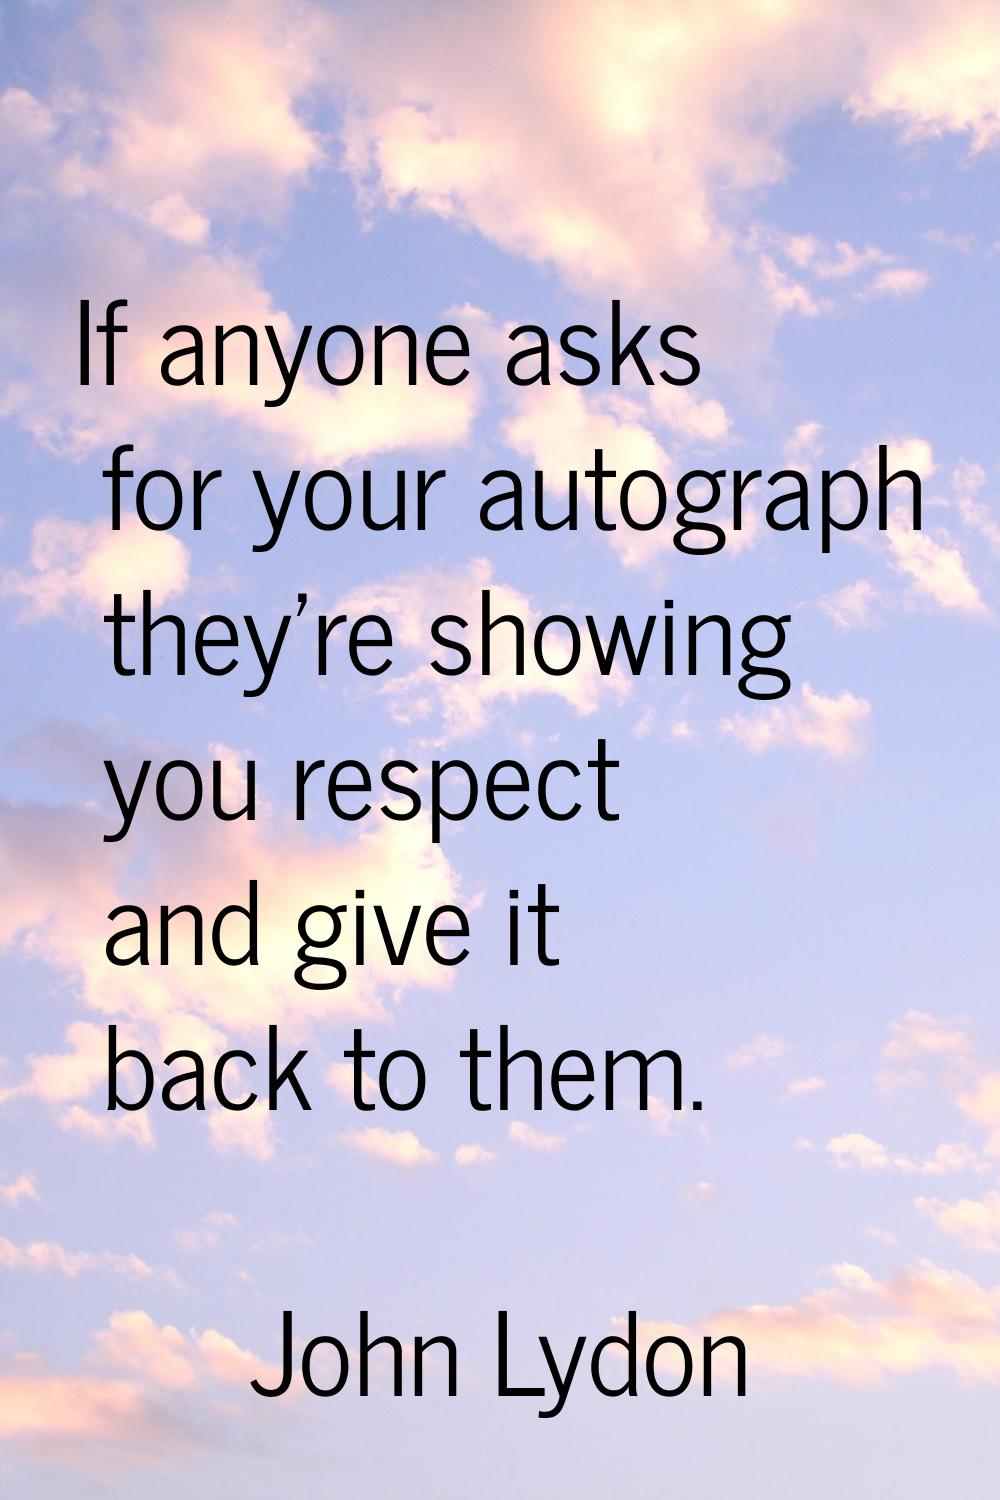 If anyone asks for your autograph they're showing you respect and give it back to them.